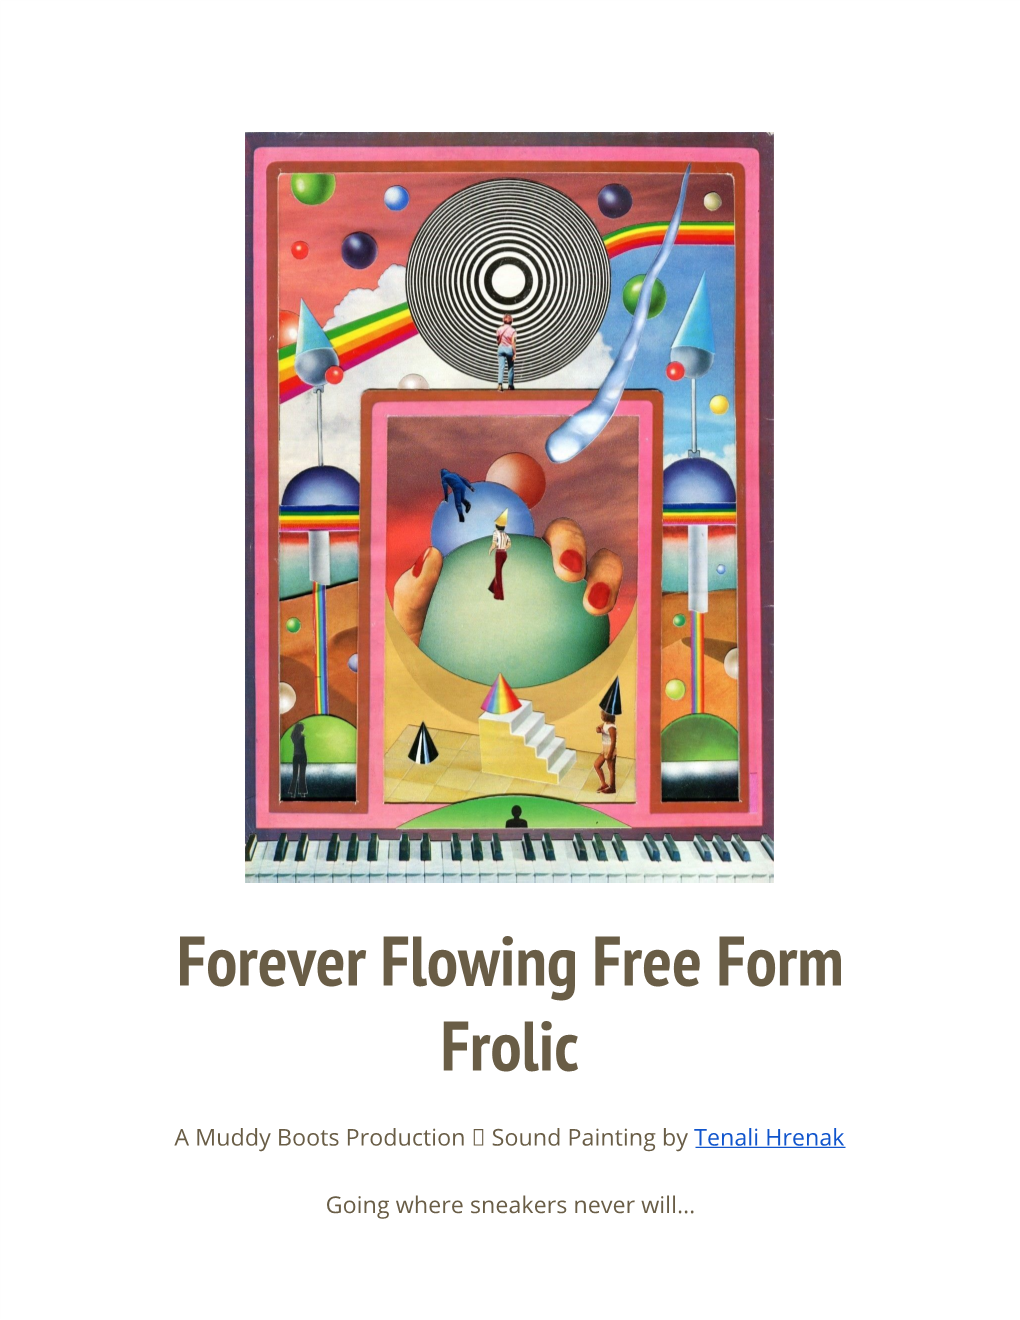 Forever Flowing Free Form Frolic